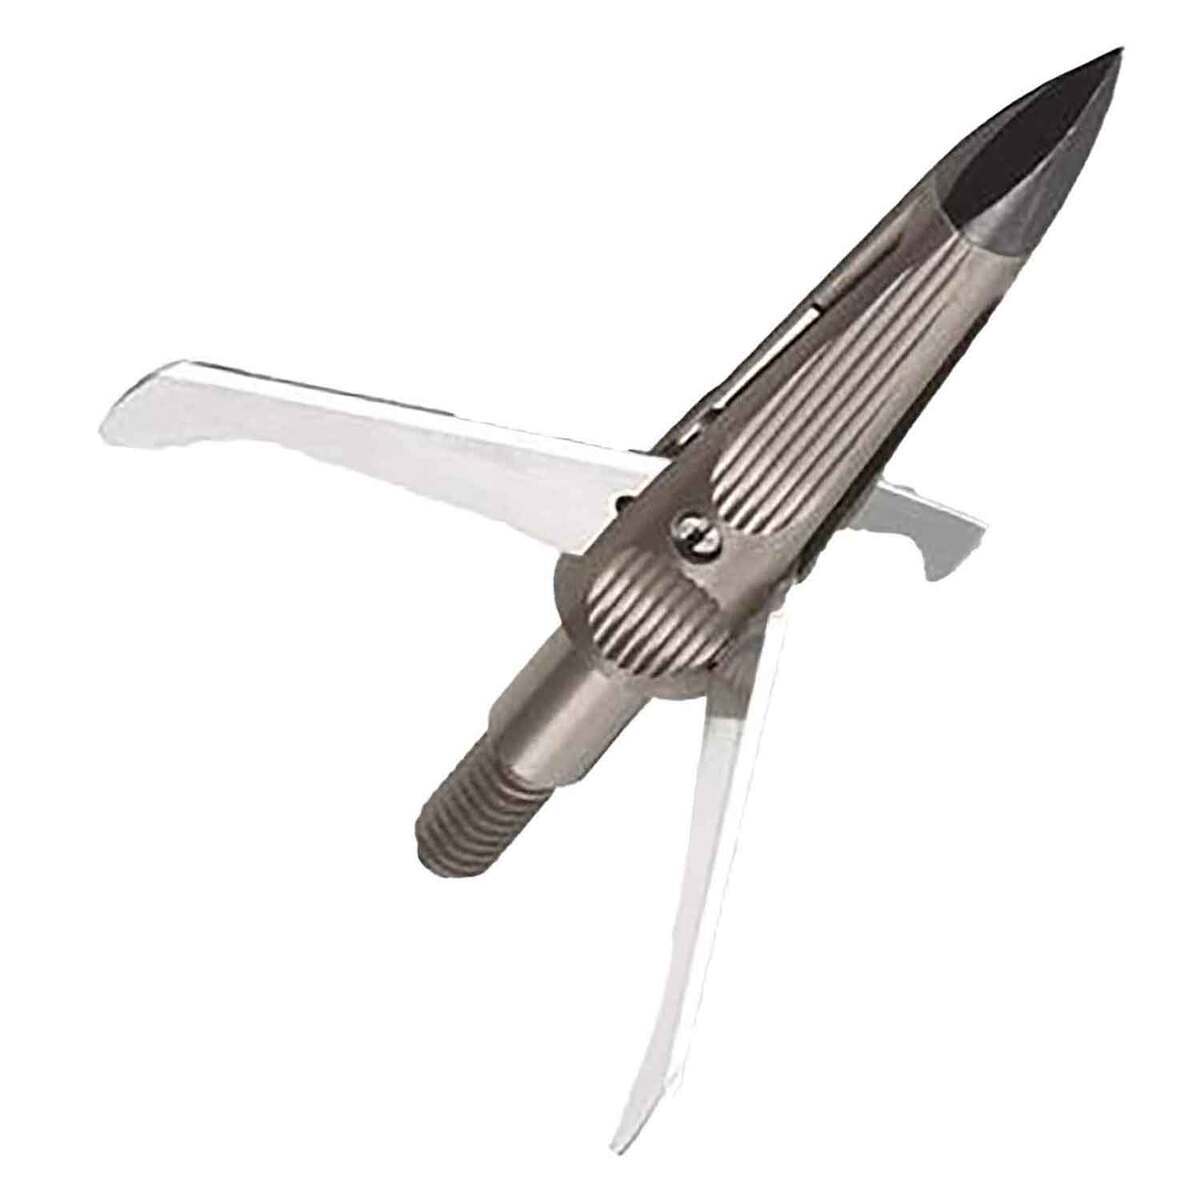 New Archery Products Spitfire Maxx Trophy 100gr Expandable Broadhead 3 Pack Sportsmans 5780